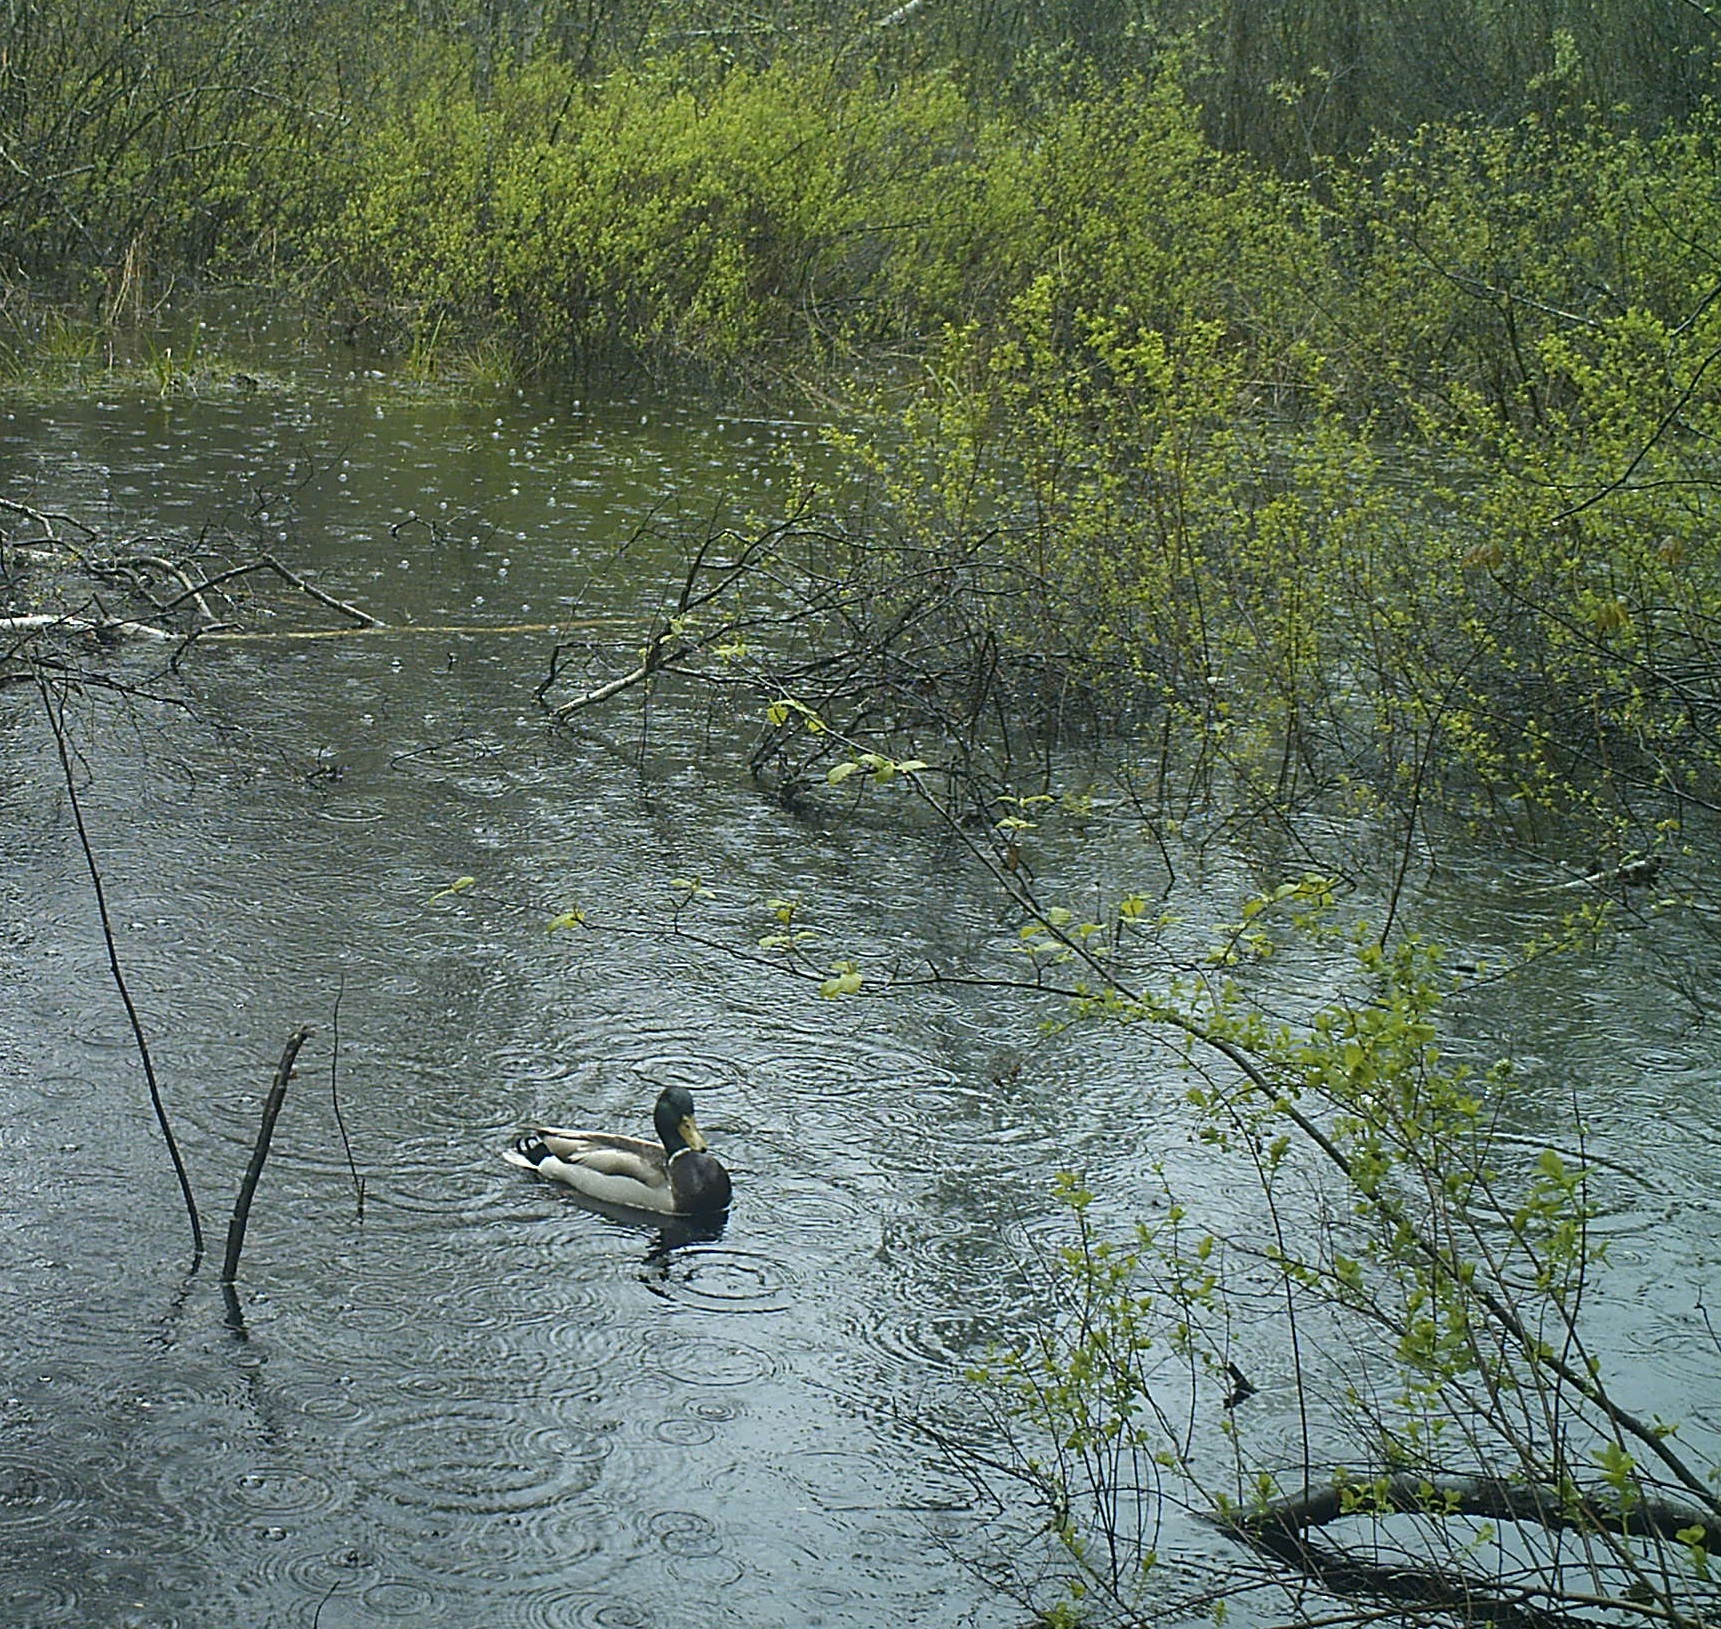 A Mallard floats on a vernal pool during a rainstorm. Mallard ducklings were observed at several pools near urban areas. Photo credit: Pools and People Trail Camera 